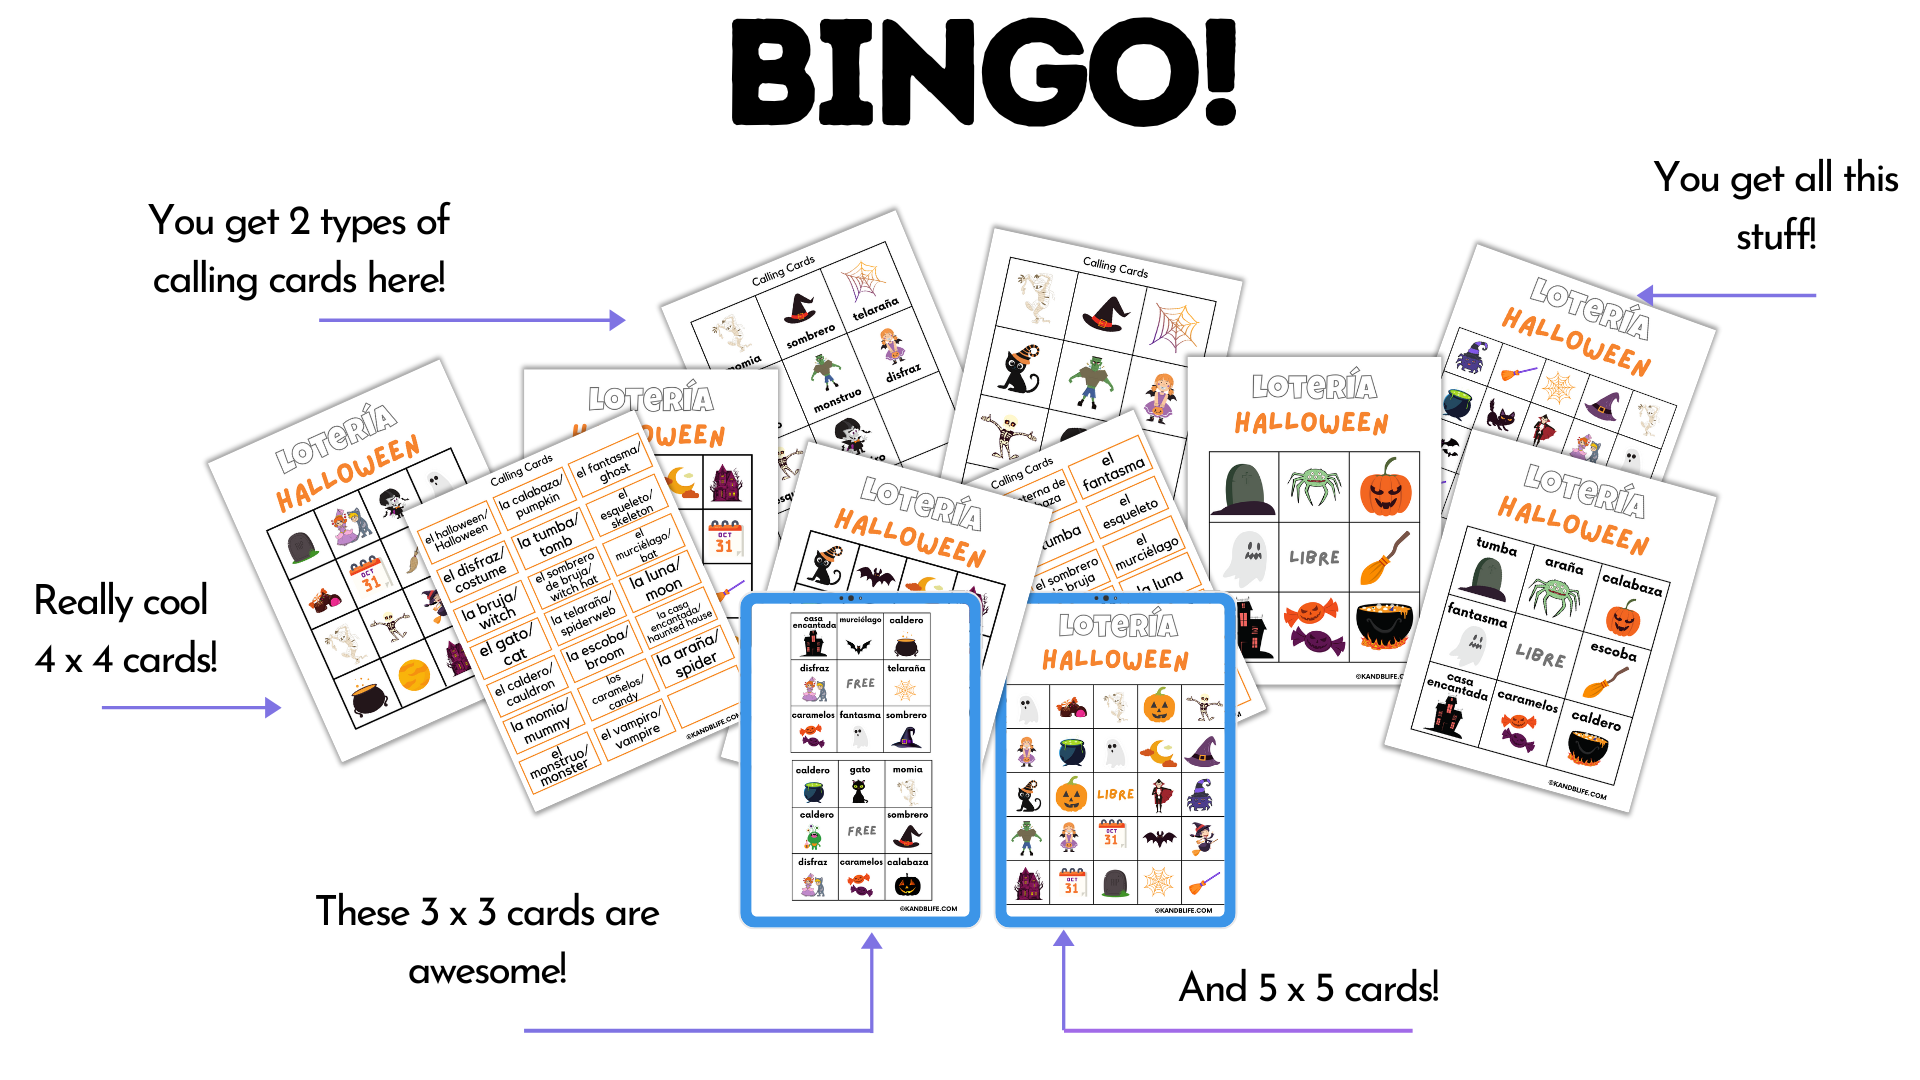 A huge collection of Bingo Cards for Halloween in Spanish!